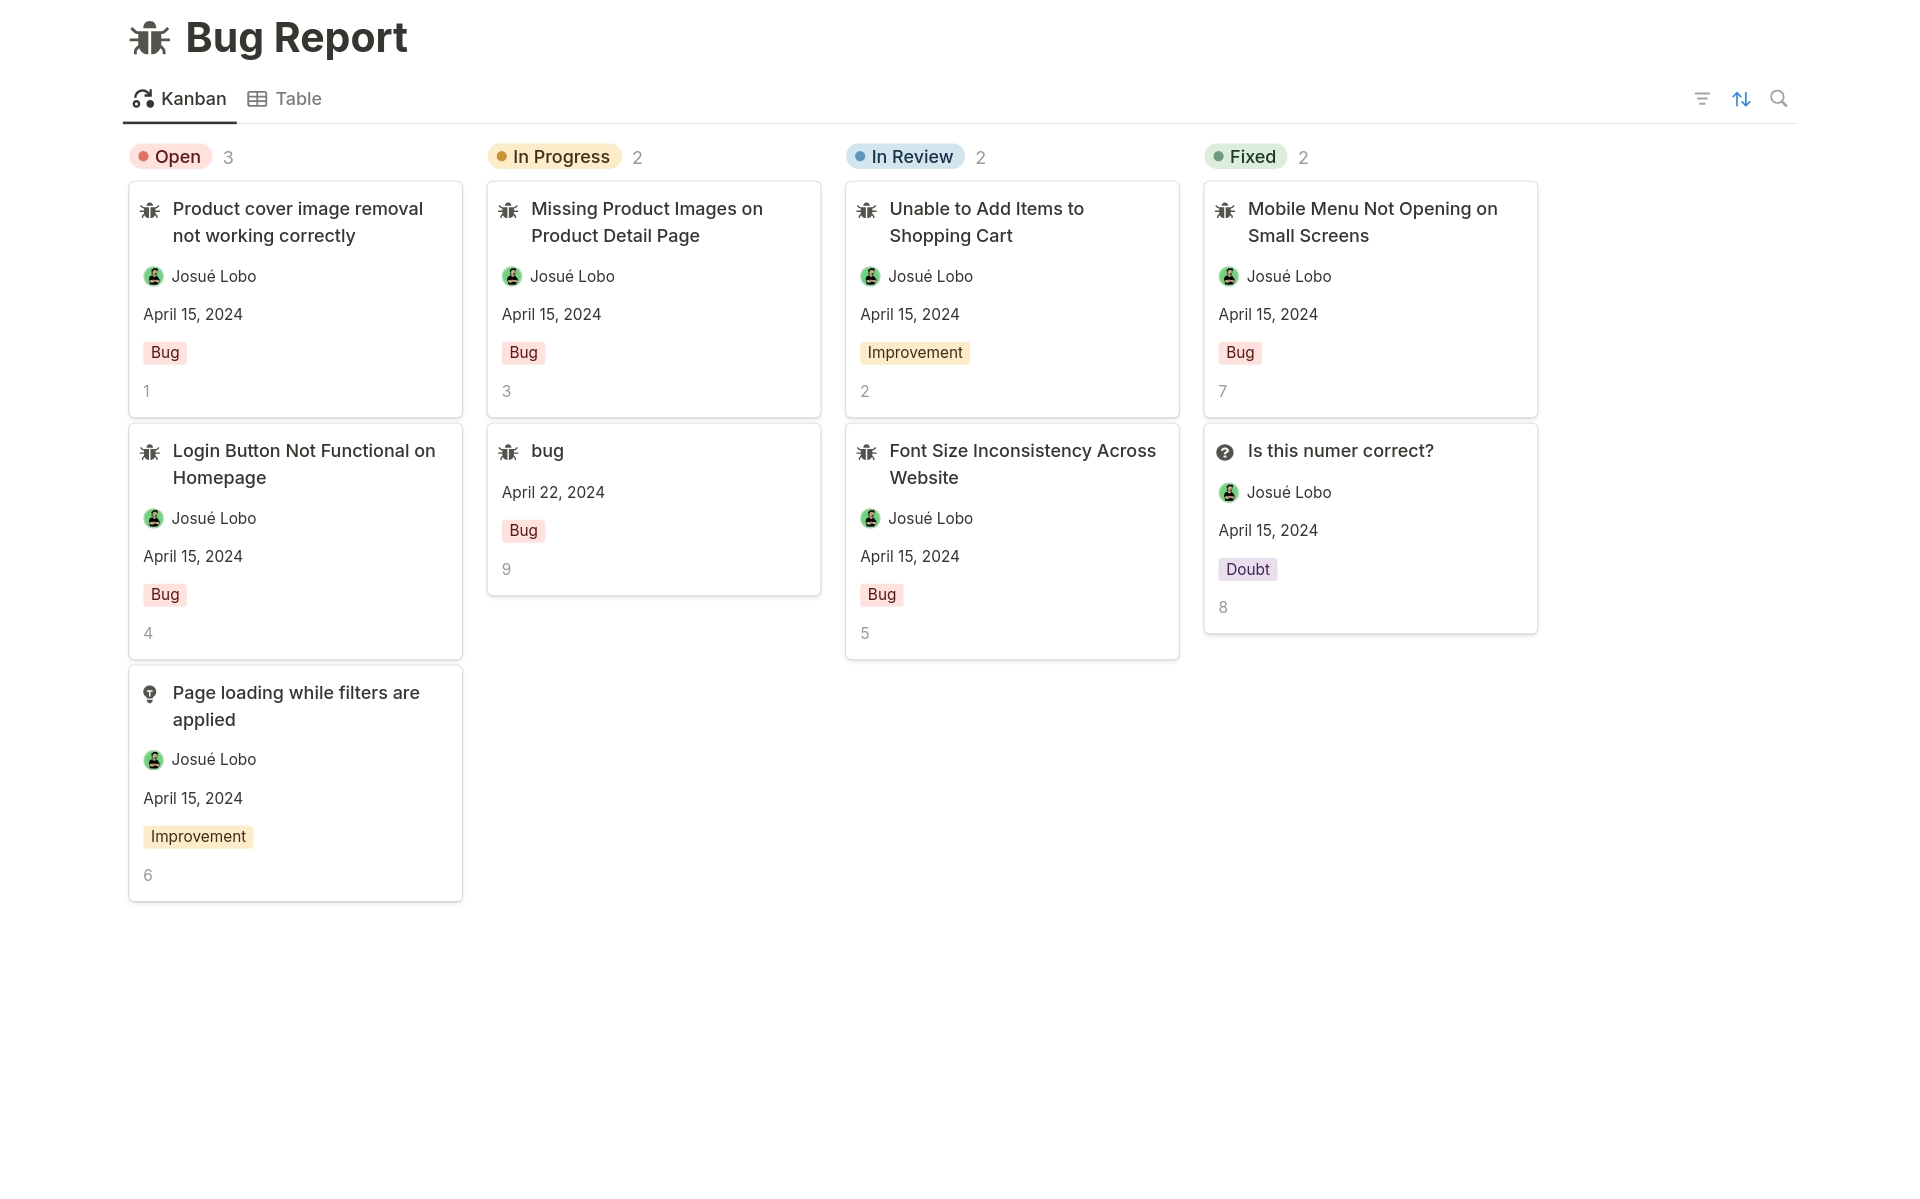 Streamline bug tracking with our Notion Bug Report Tracker Template. Track issues, visualize status, customize workflows, and access on mobile. Features include stats, customization options, and a "Close Issue" button.